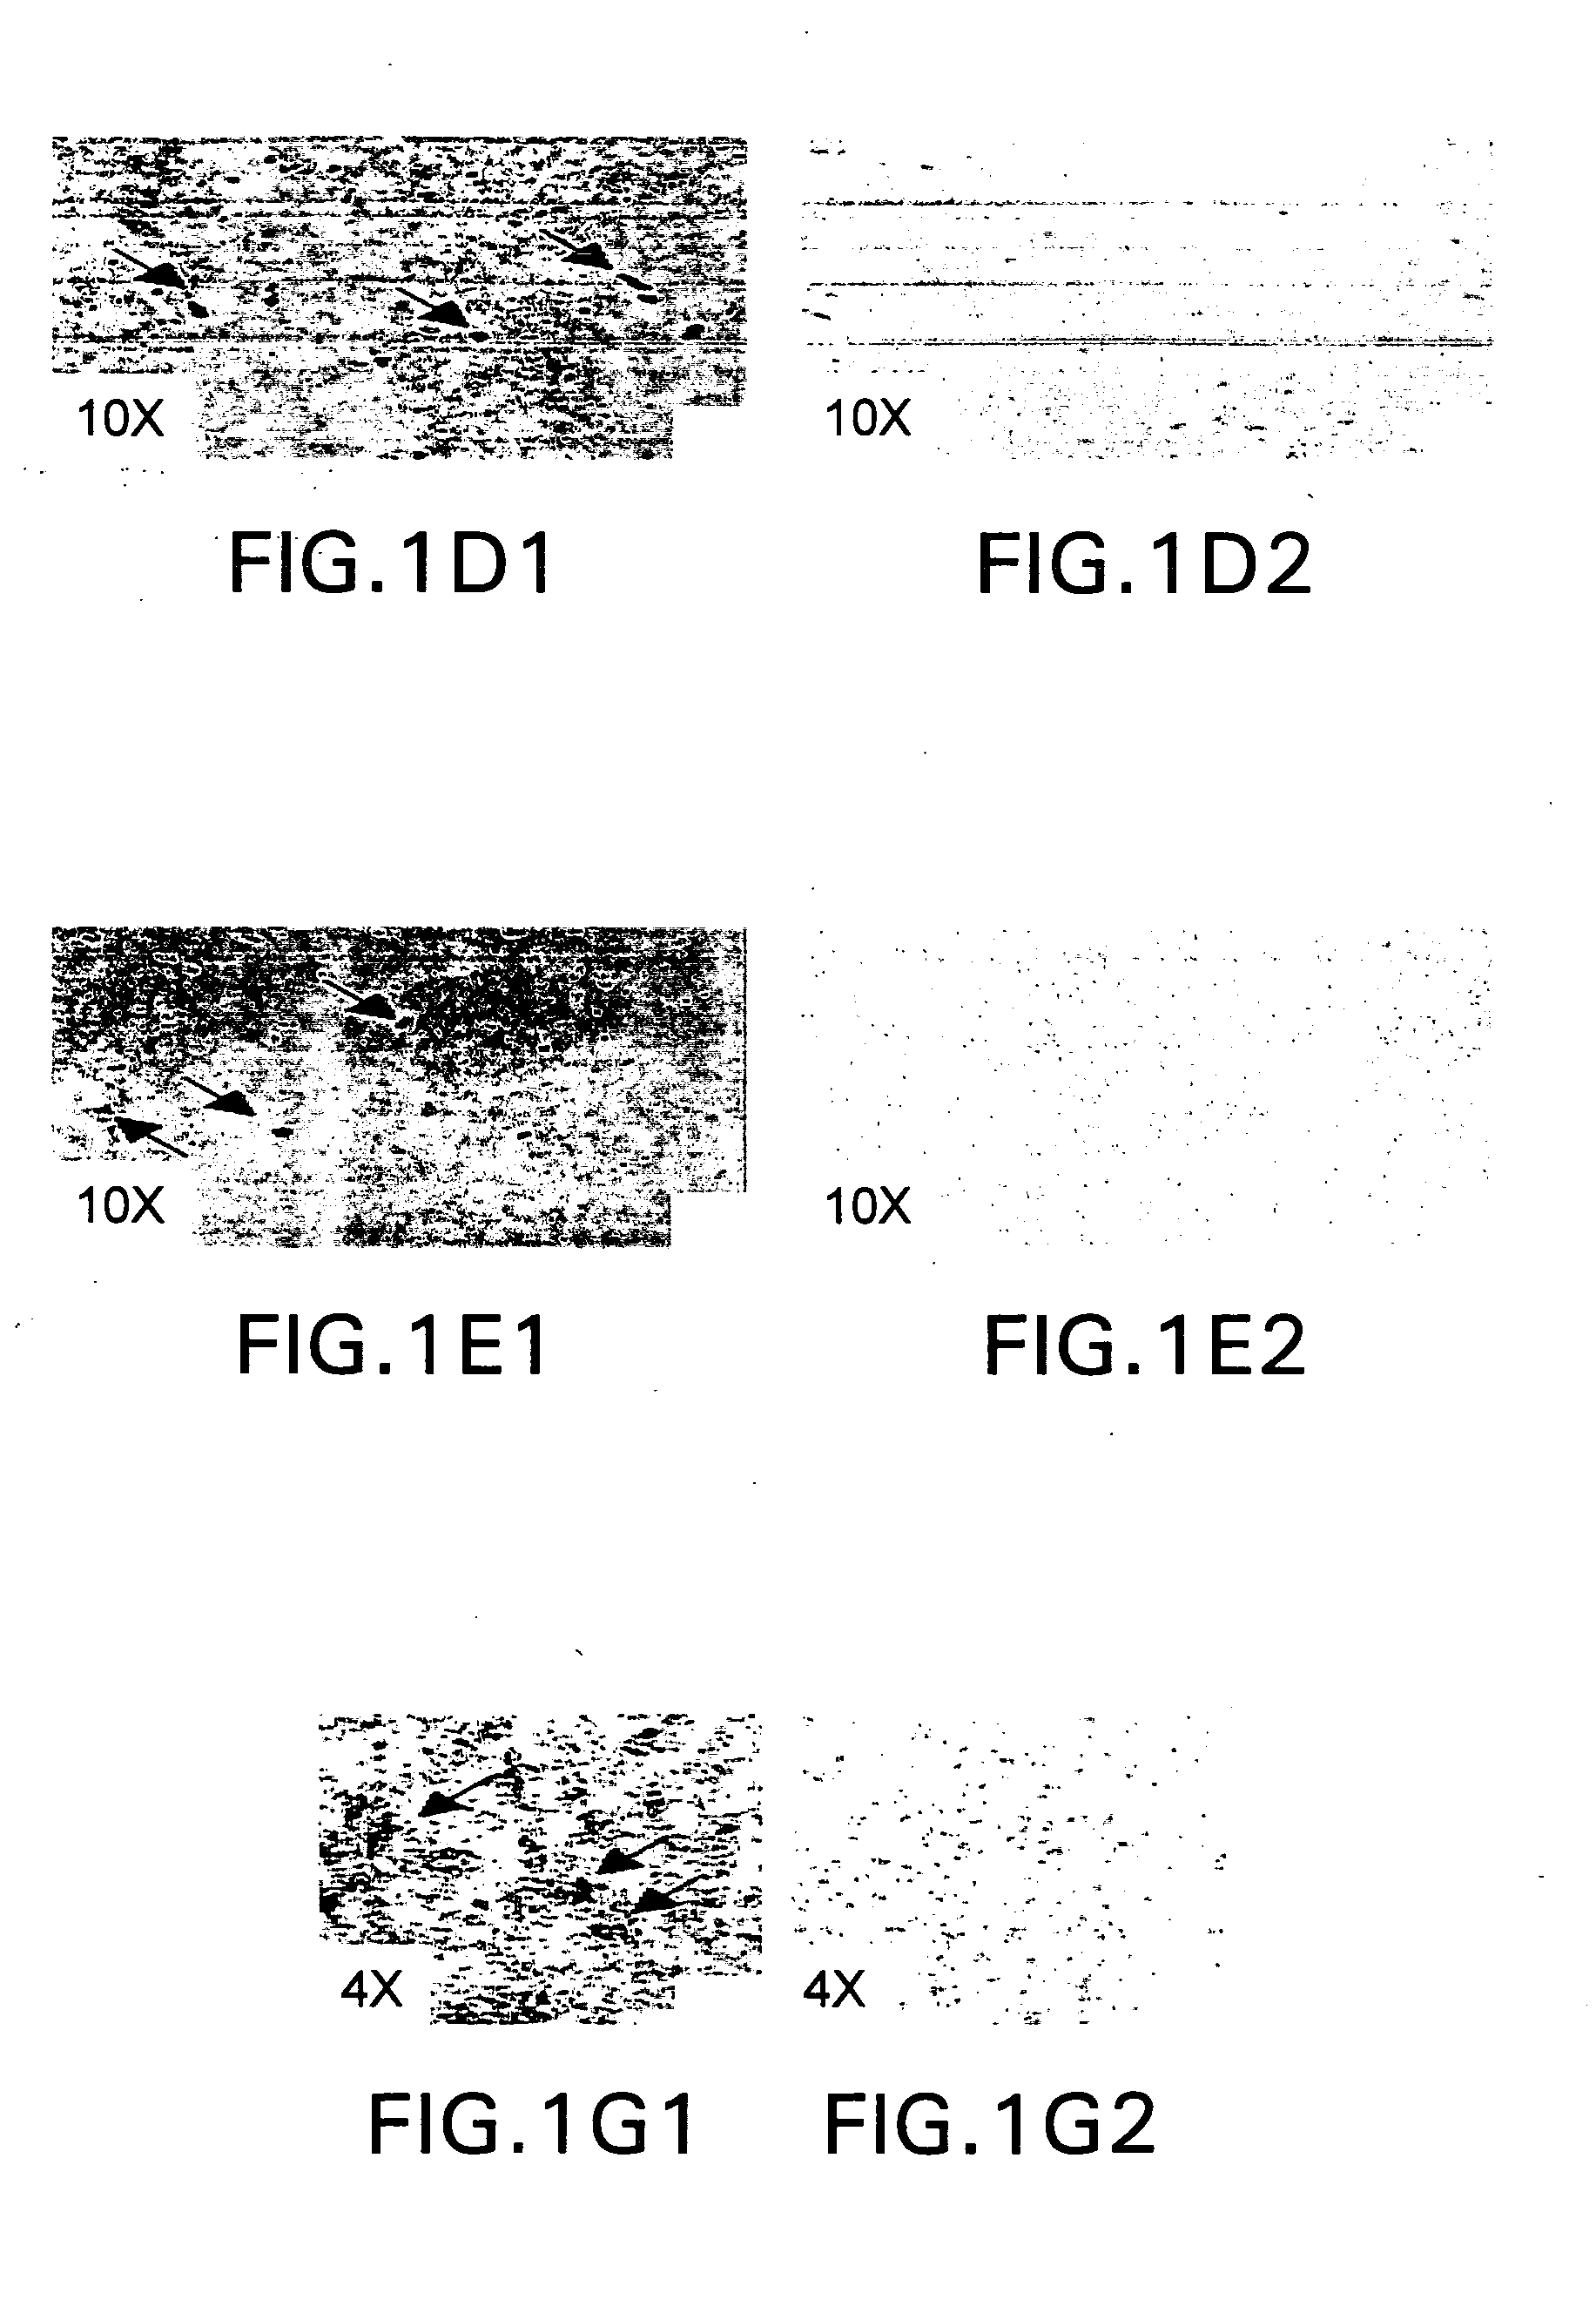 Vectors having both isoforms of beta-hexosaminidase and uses of the same